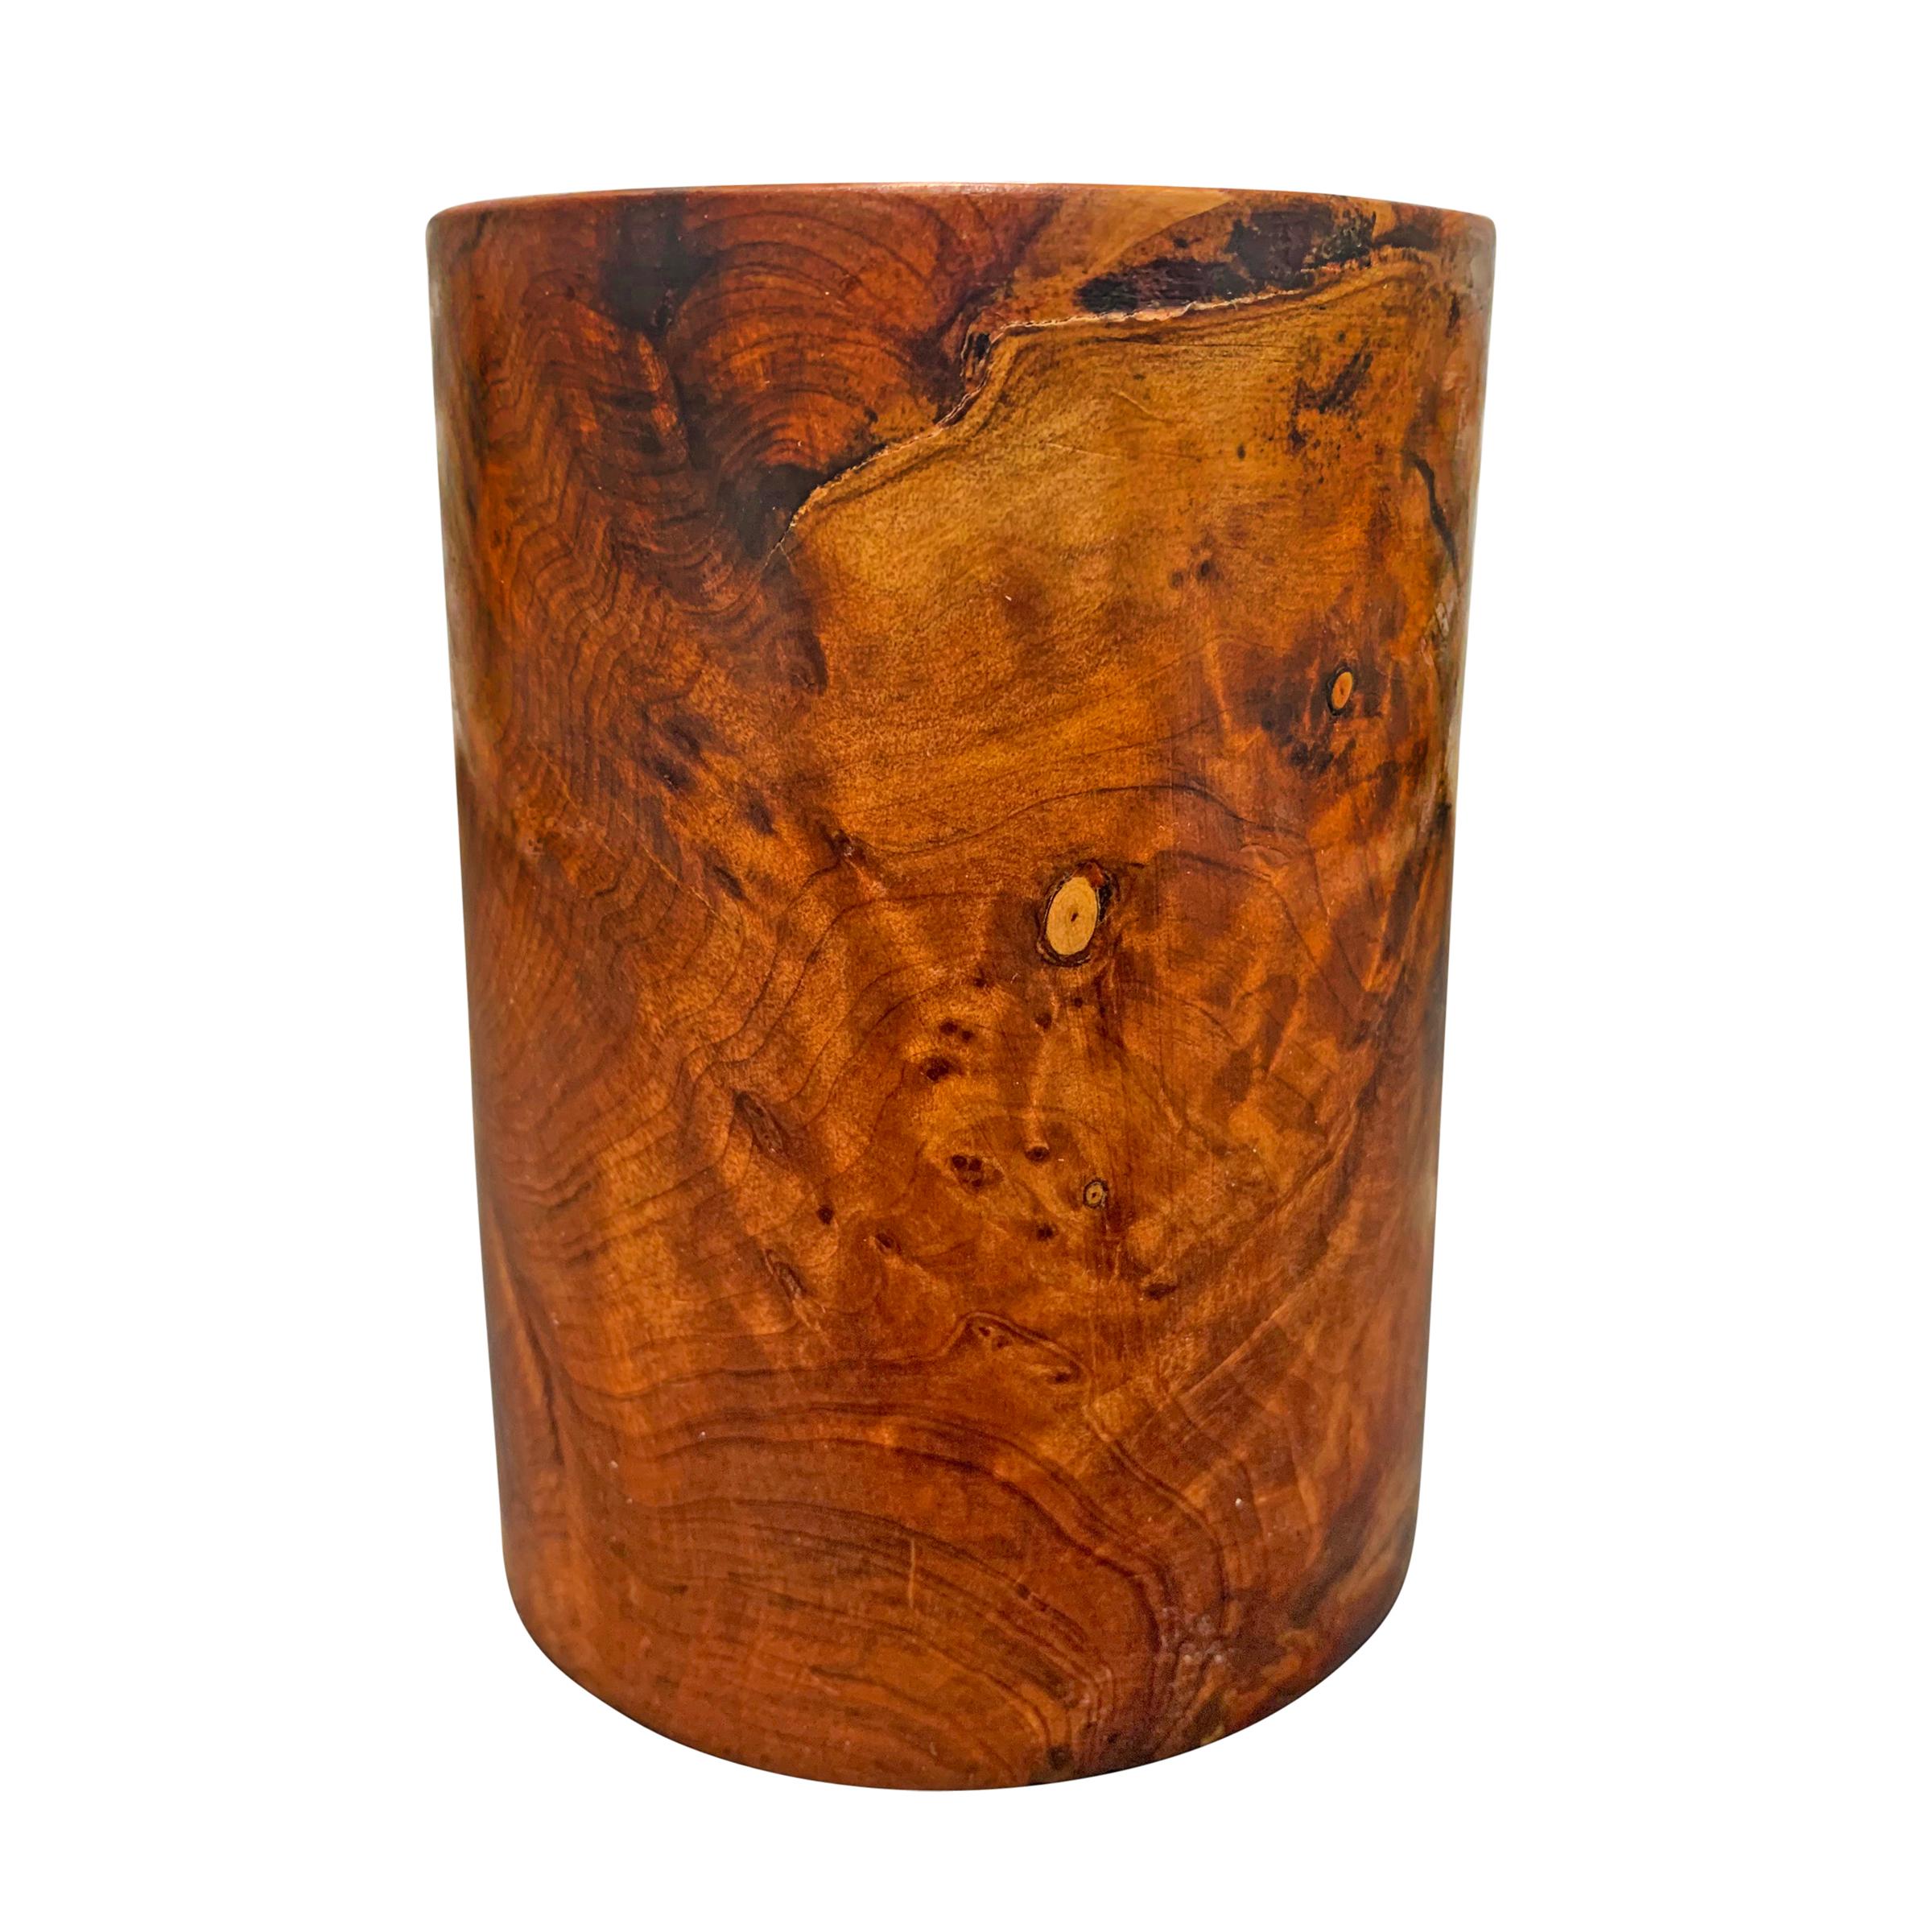 A wonderful mid-20th century burl wood pencil cup with a wildly expressive grain pattern that appears to glow from within!